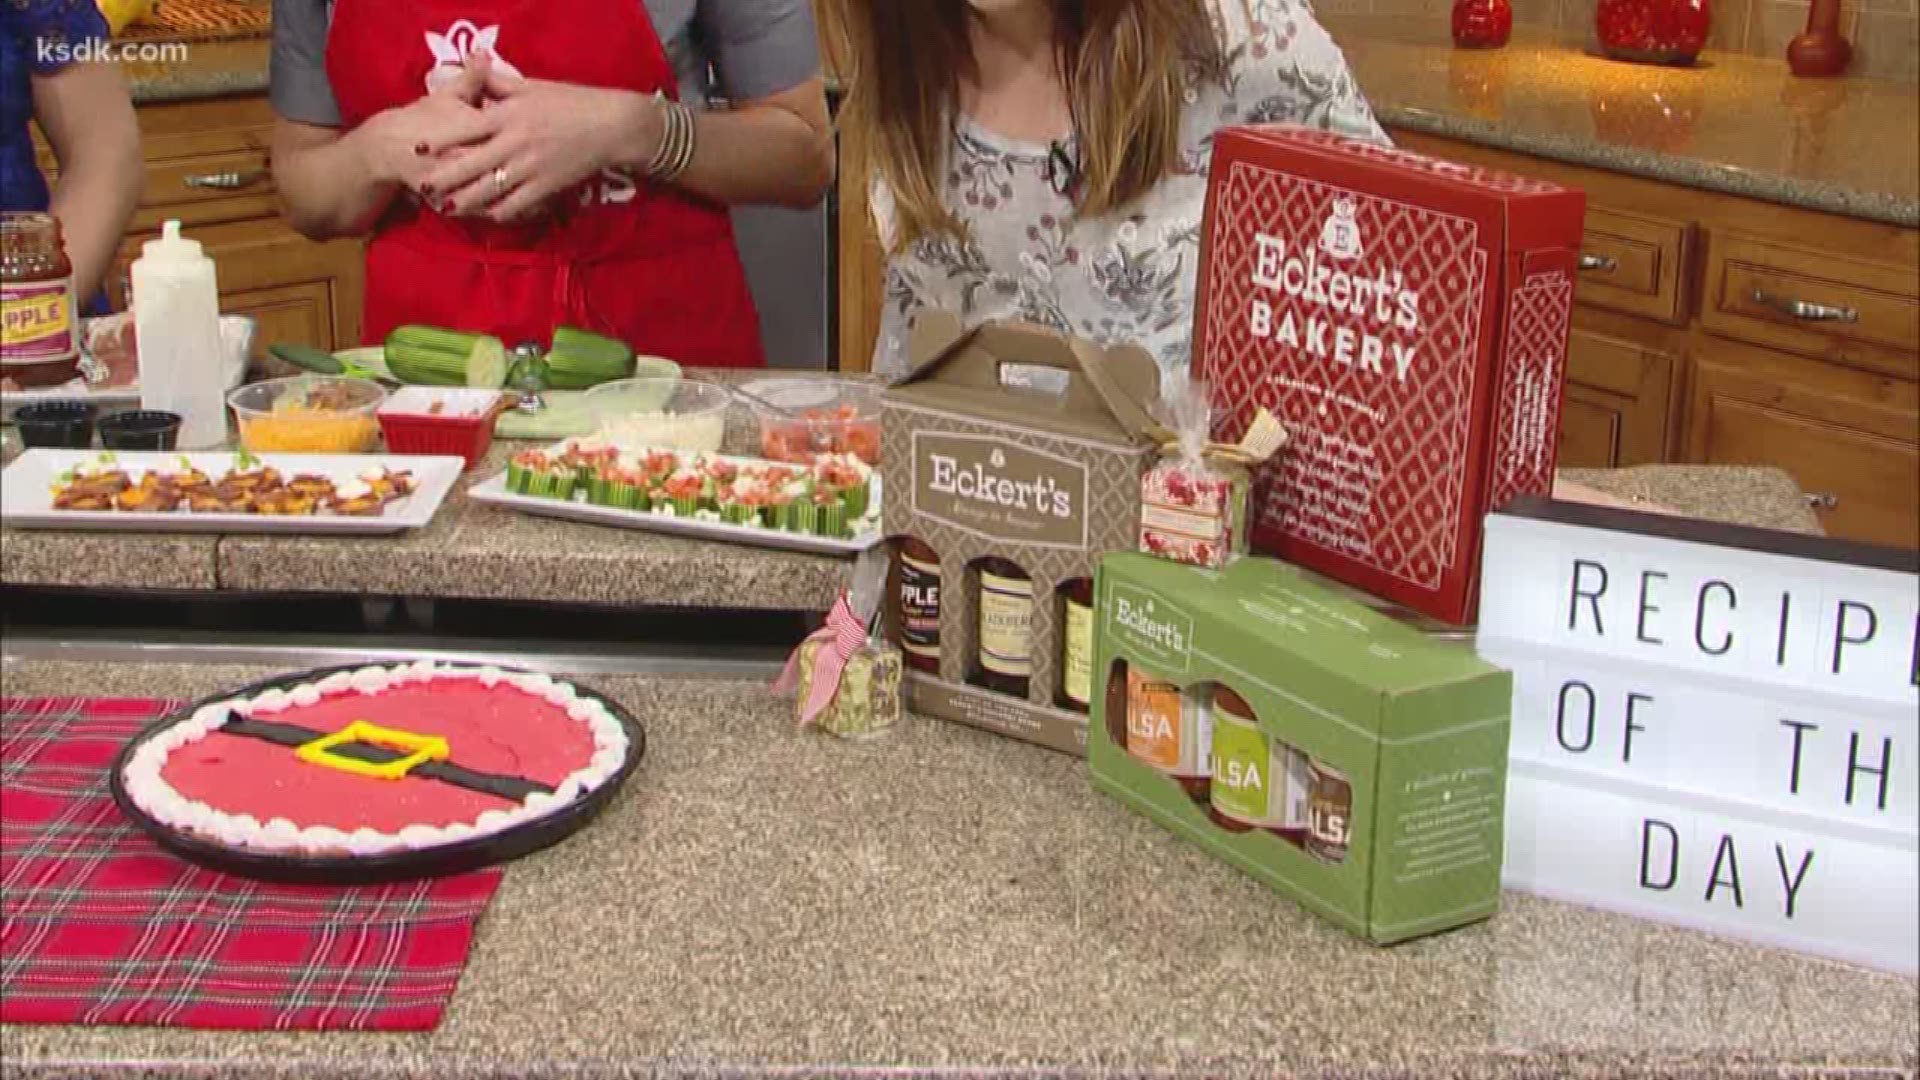 Angie Eckert of Eckert’s Farm shared three recipes for appetizers just in time for the holidays.